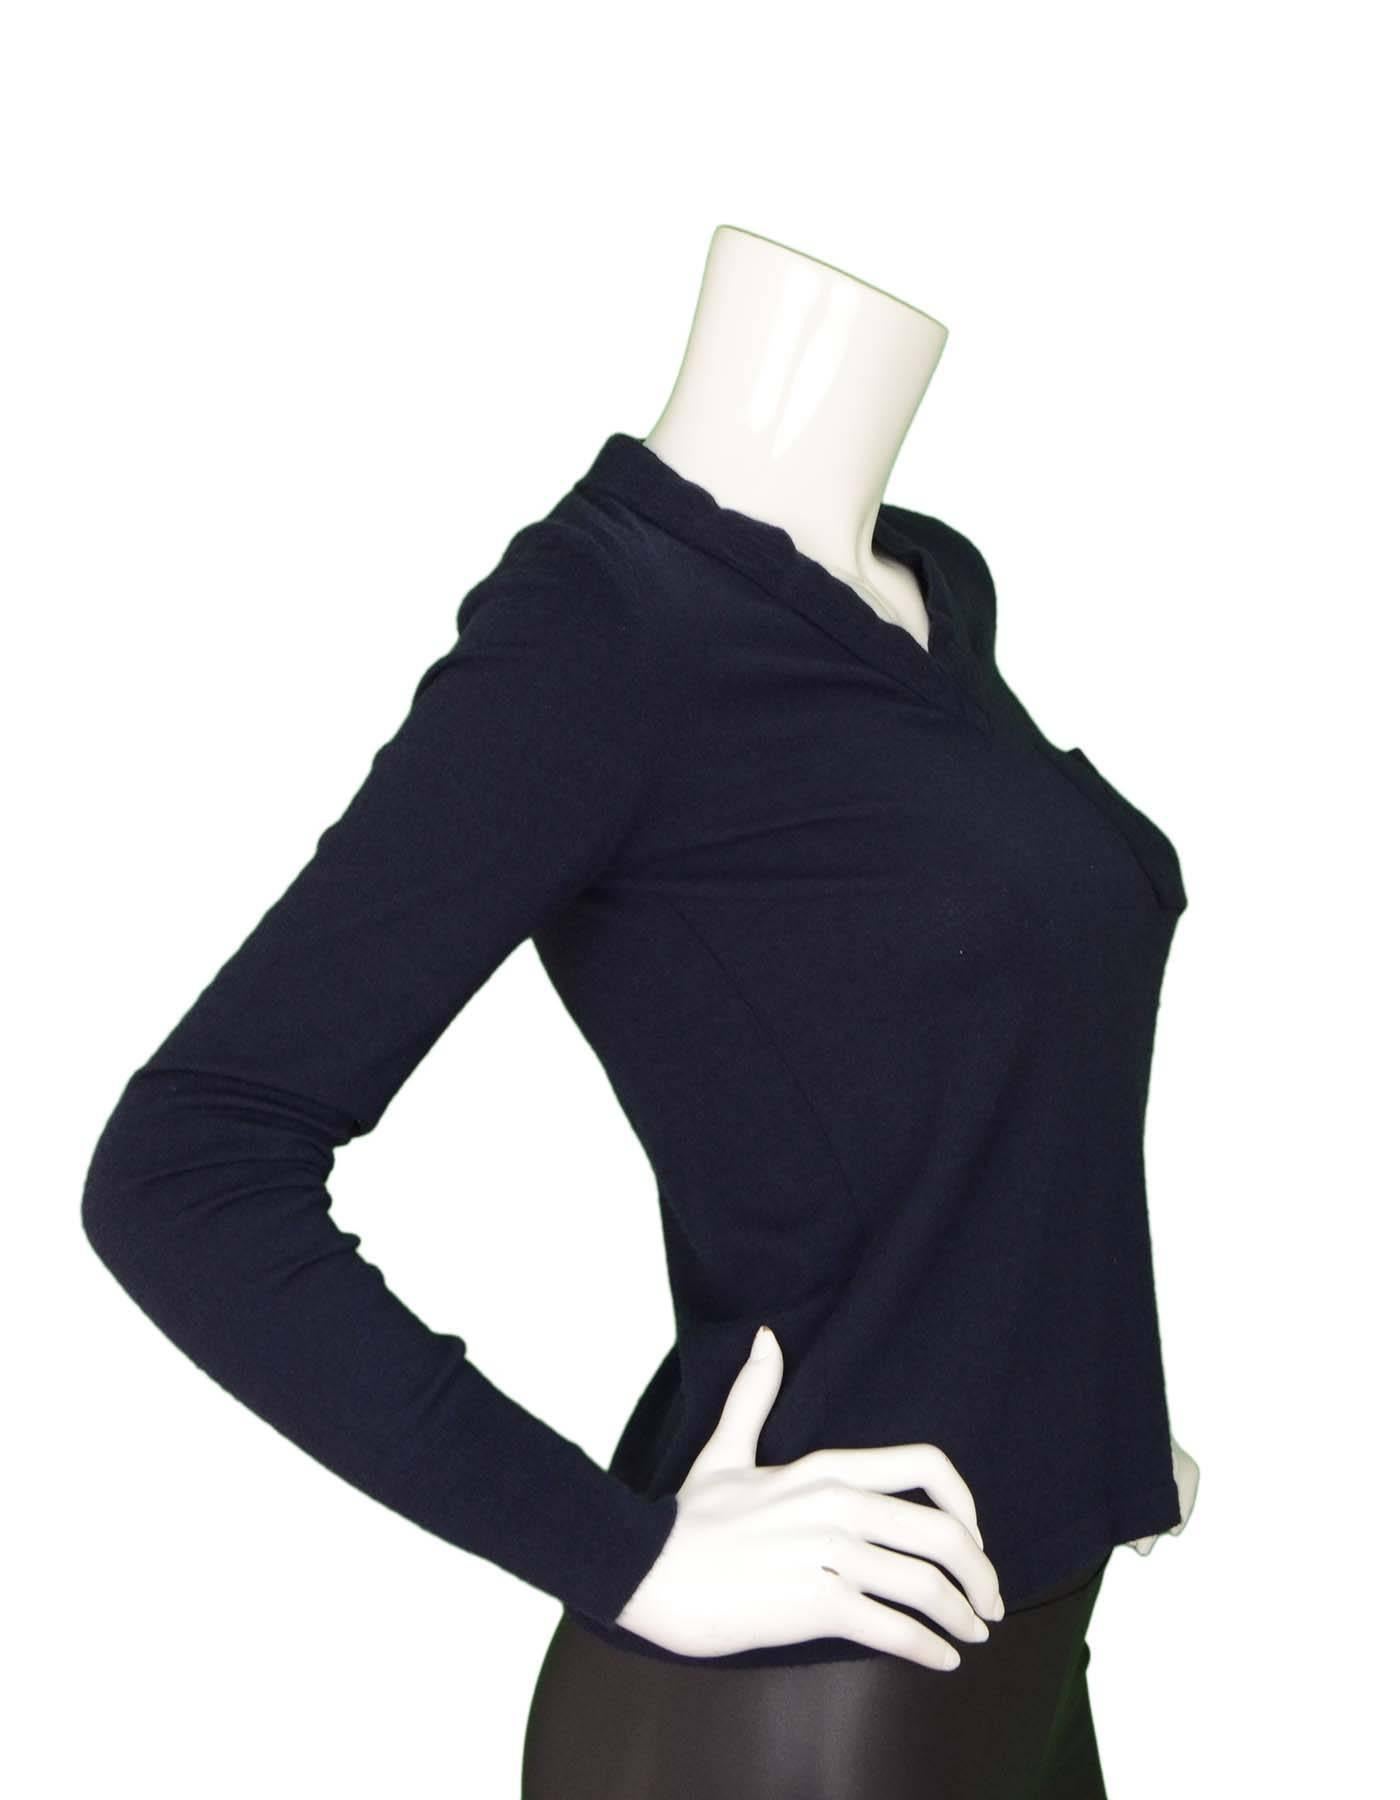 Chanel Navy Cashmere Sweater 
Features breast patch pocket with stitched flower on it
Made In: Italy
Color: Navy
Composition: 93% cashmere, 7% polyester
Lining: None
Closure/Opening: None
Exterior Pockets: One breast patch pocket
Interior